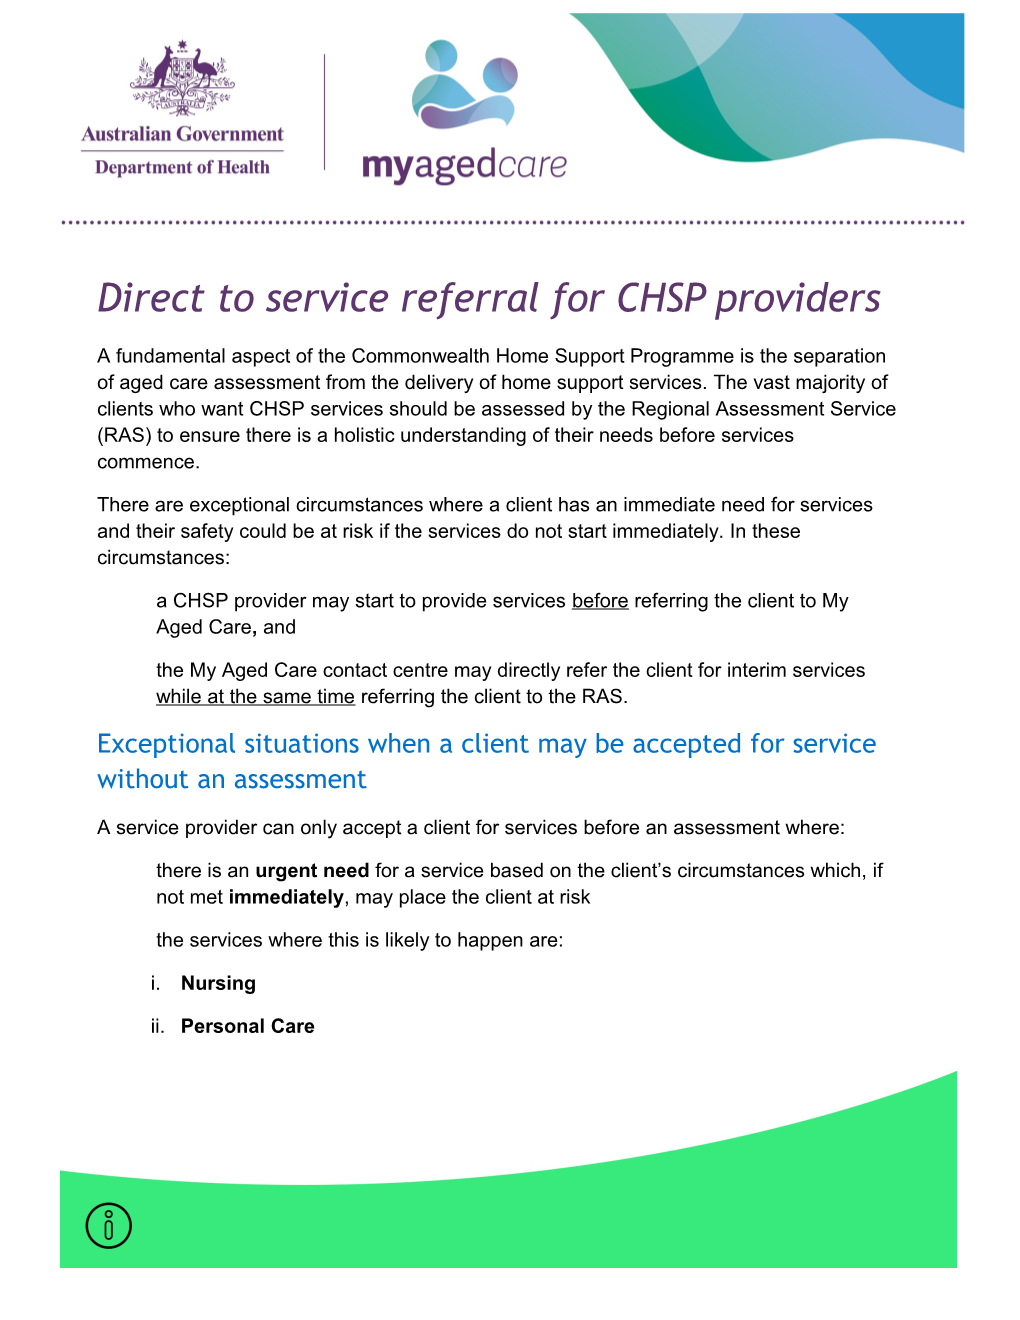 Direct to Service Referral for CHSP Providers